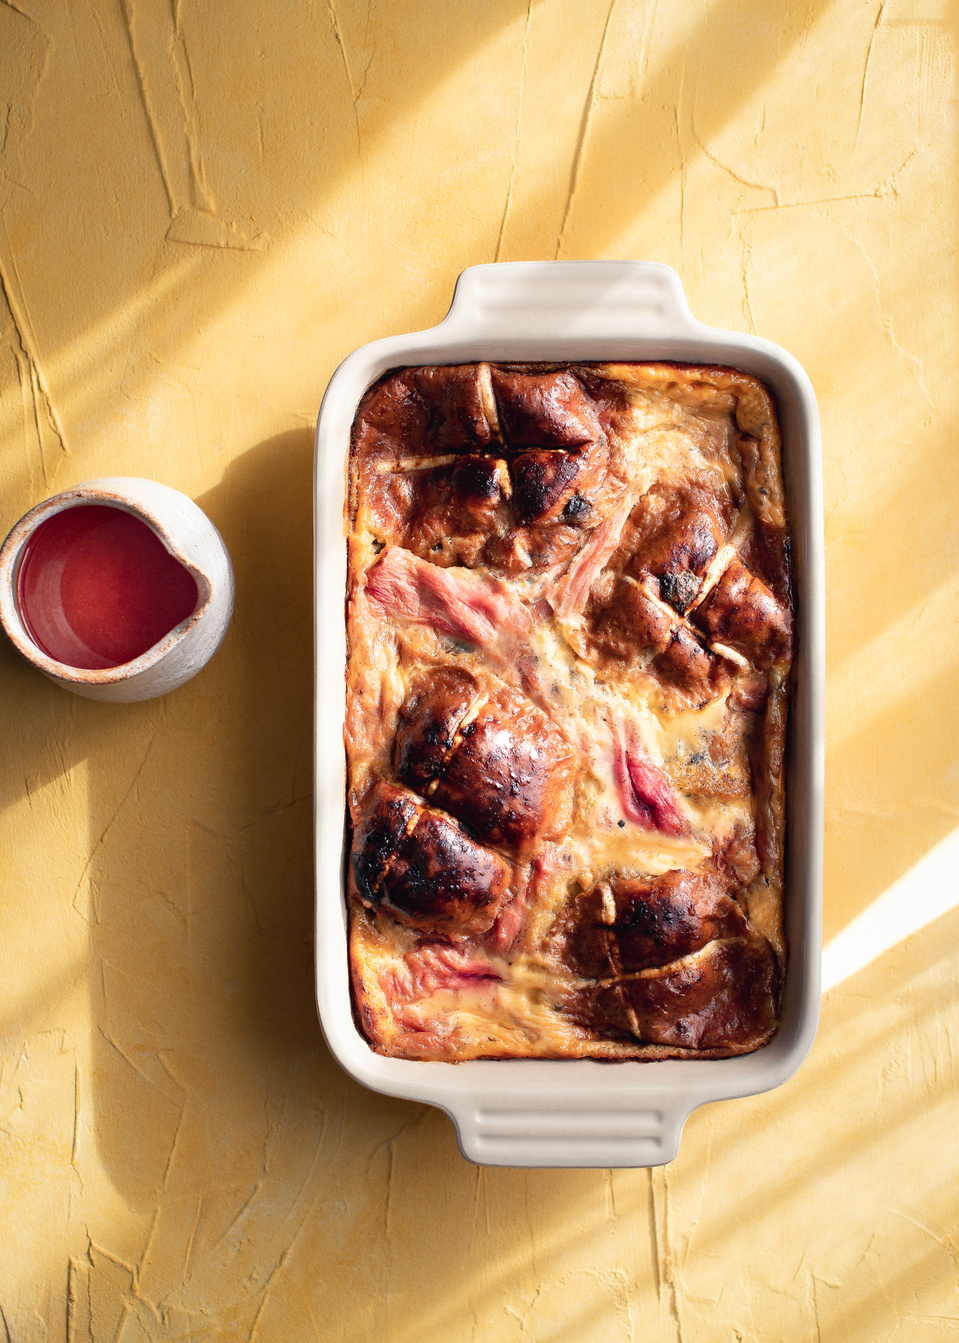 Elise Humphrey - food photographer - rhubarb hot cross bun and butter pudding on a painted yellow backdrop